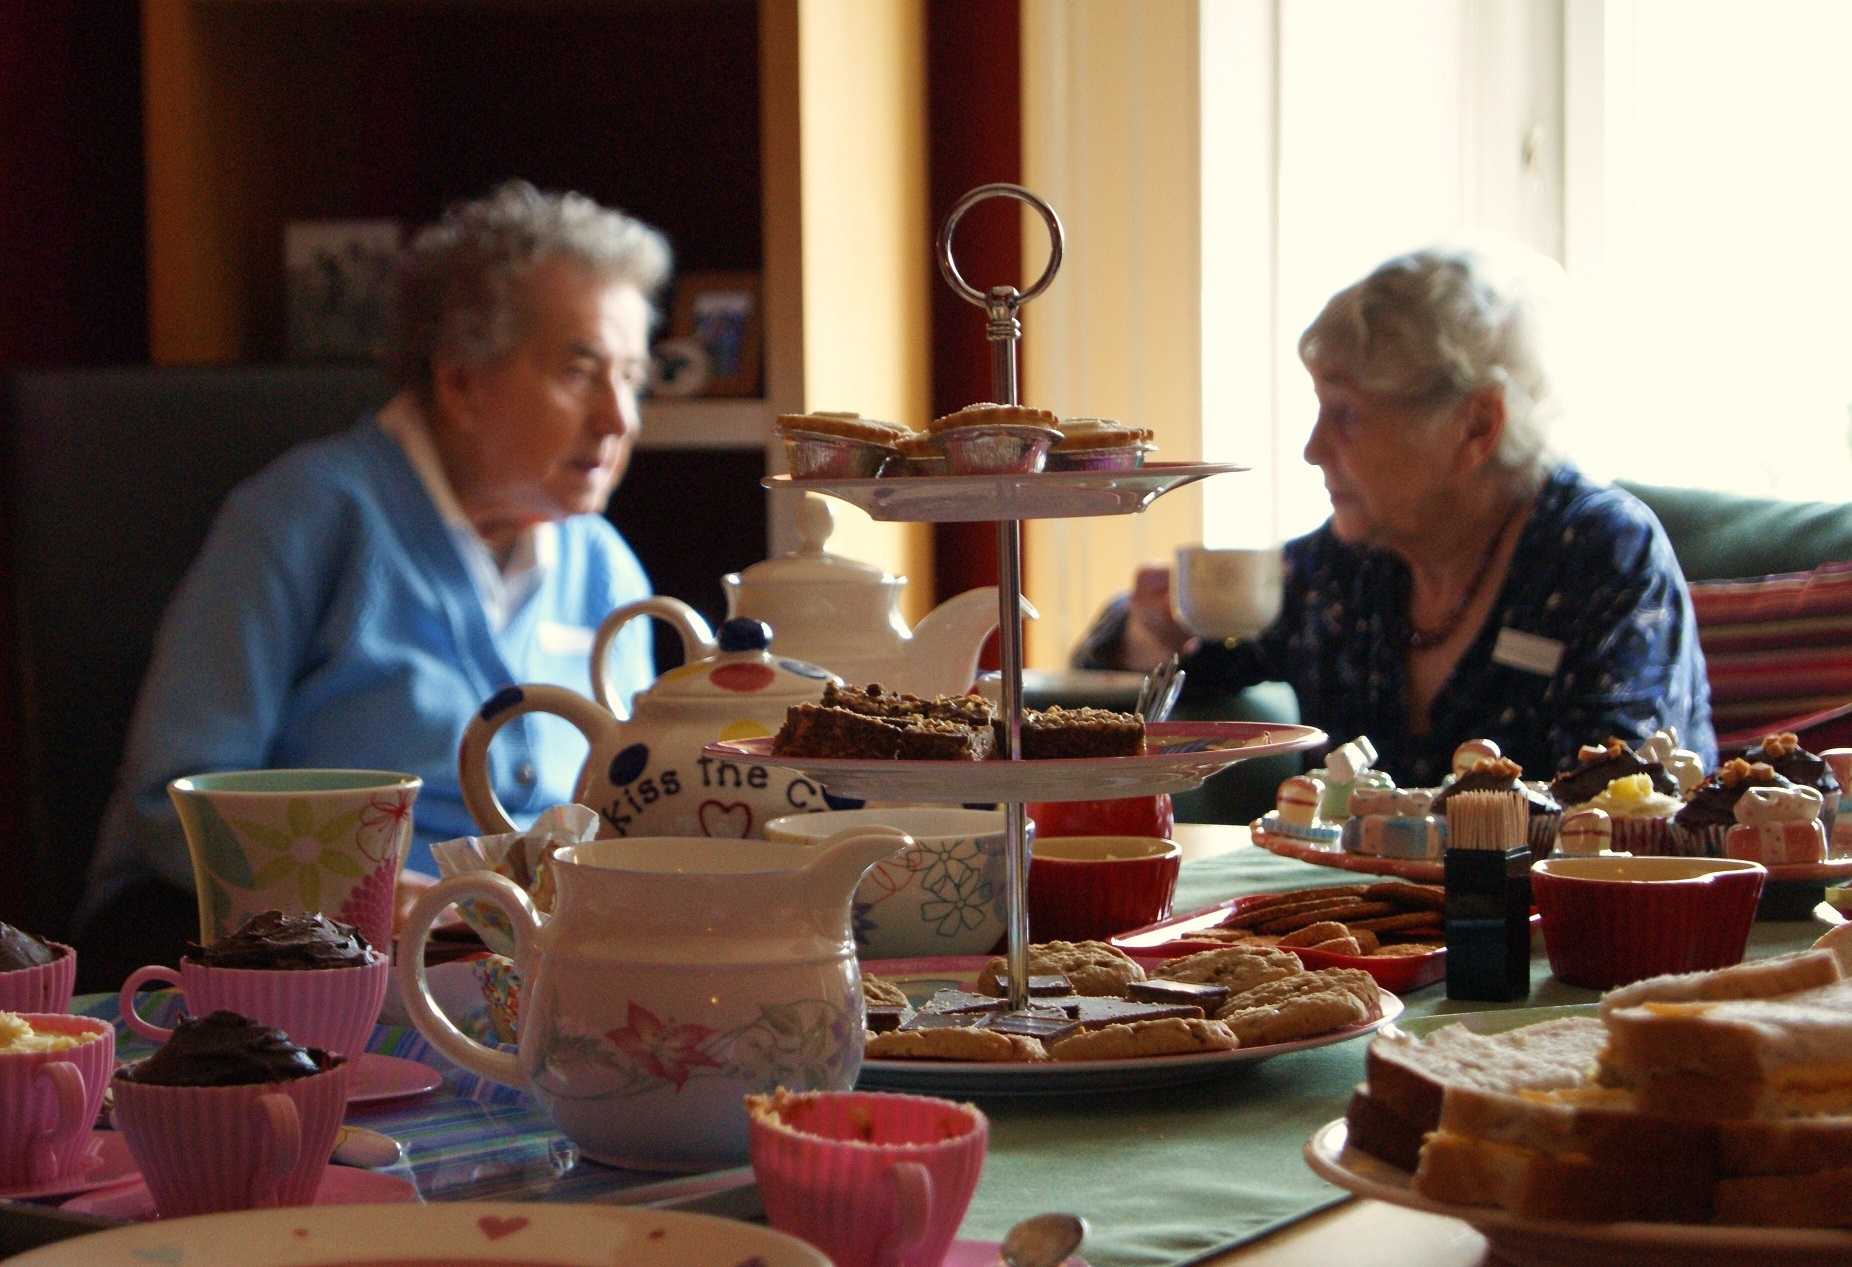 Greggs are offering free cakes and pastries for those hosting tea parties for the elderly (Contact the Elderly)